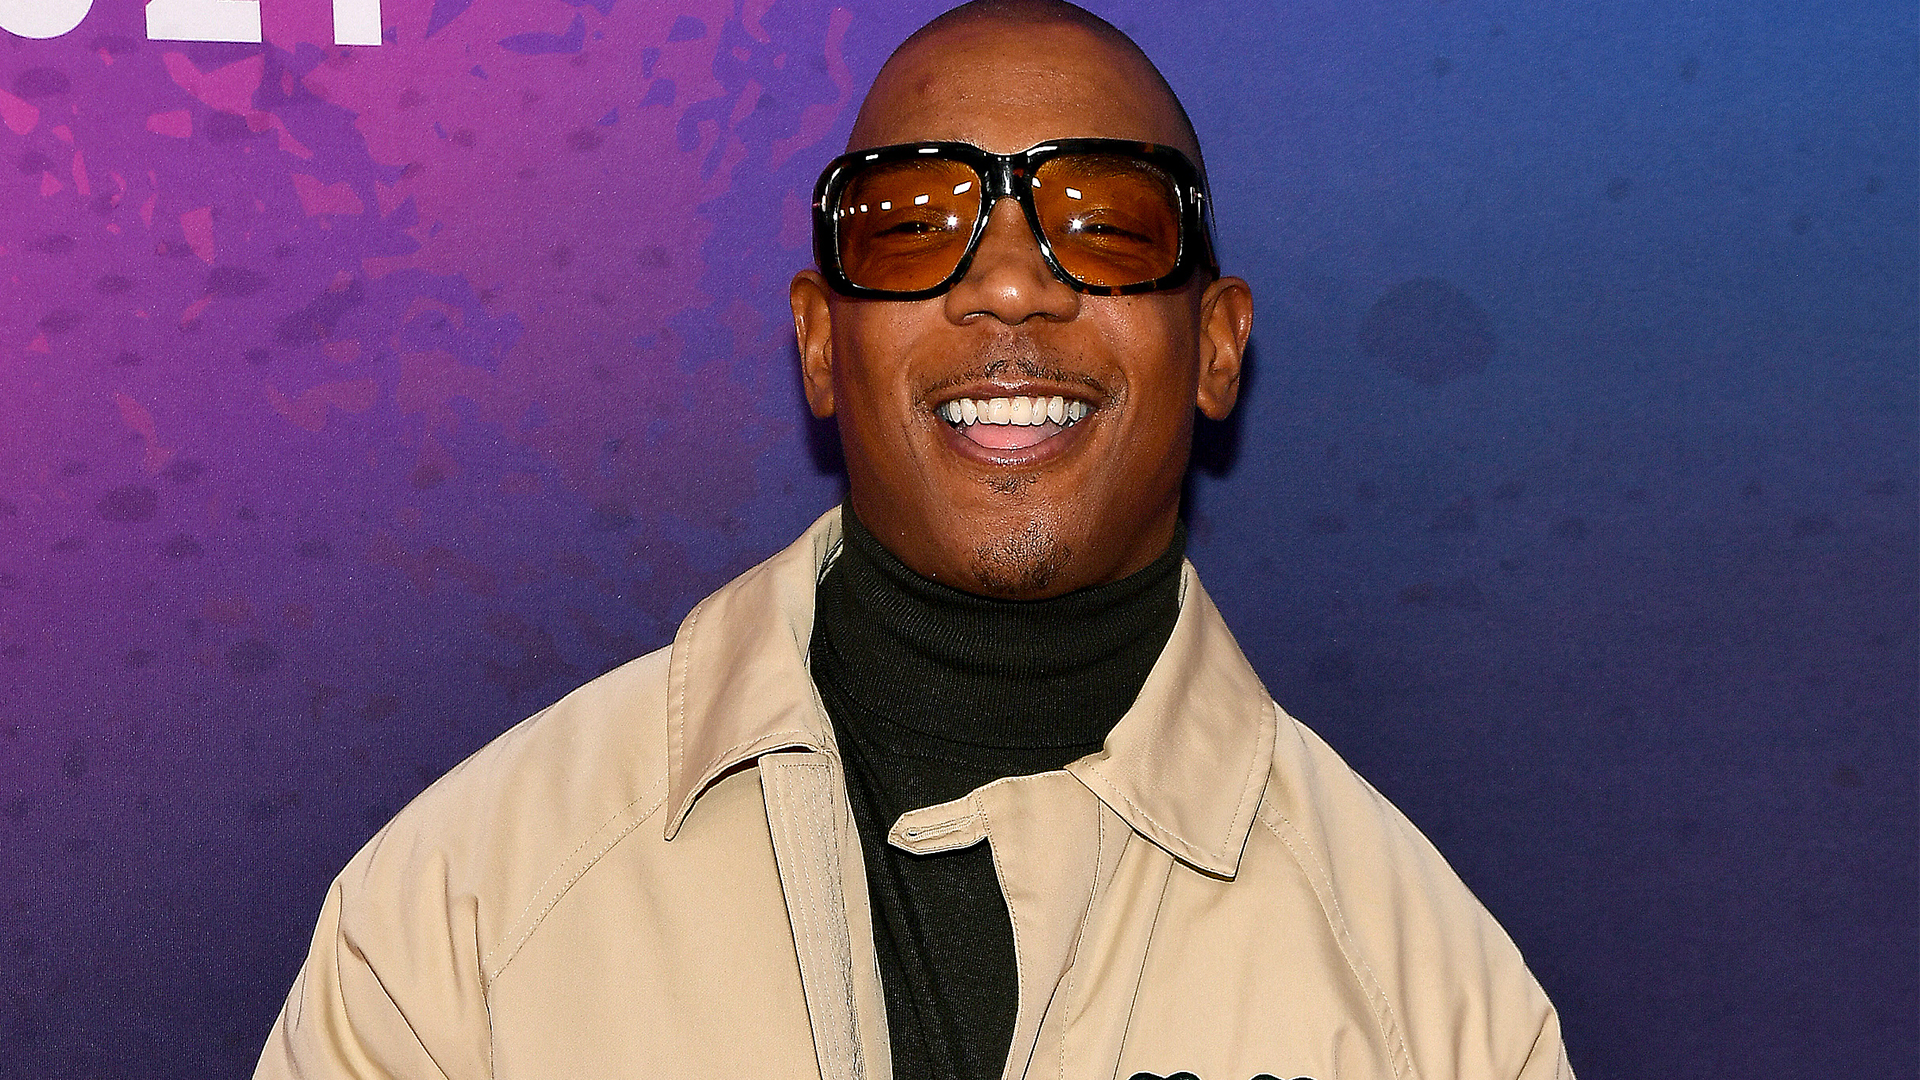 Ja Rule Puts A New Twist On Holiday Giving As He Plans To Gift Kids With NFTs